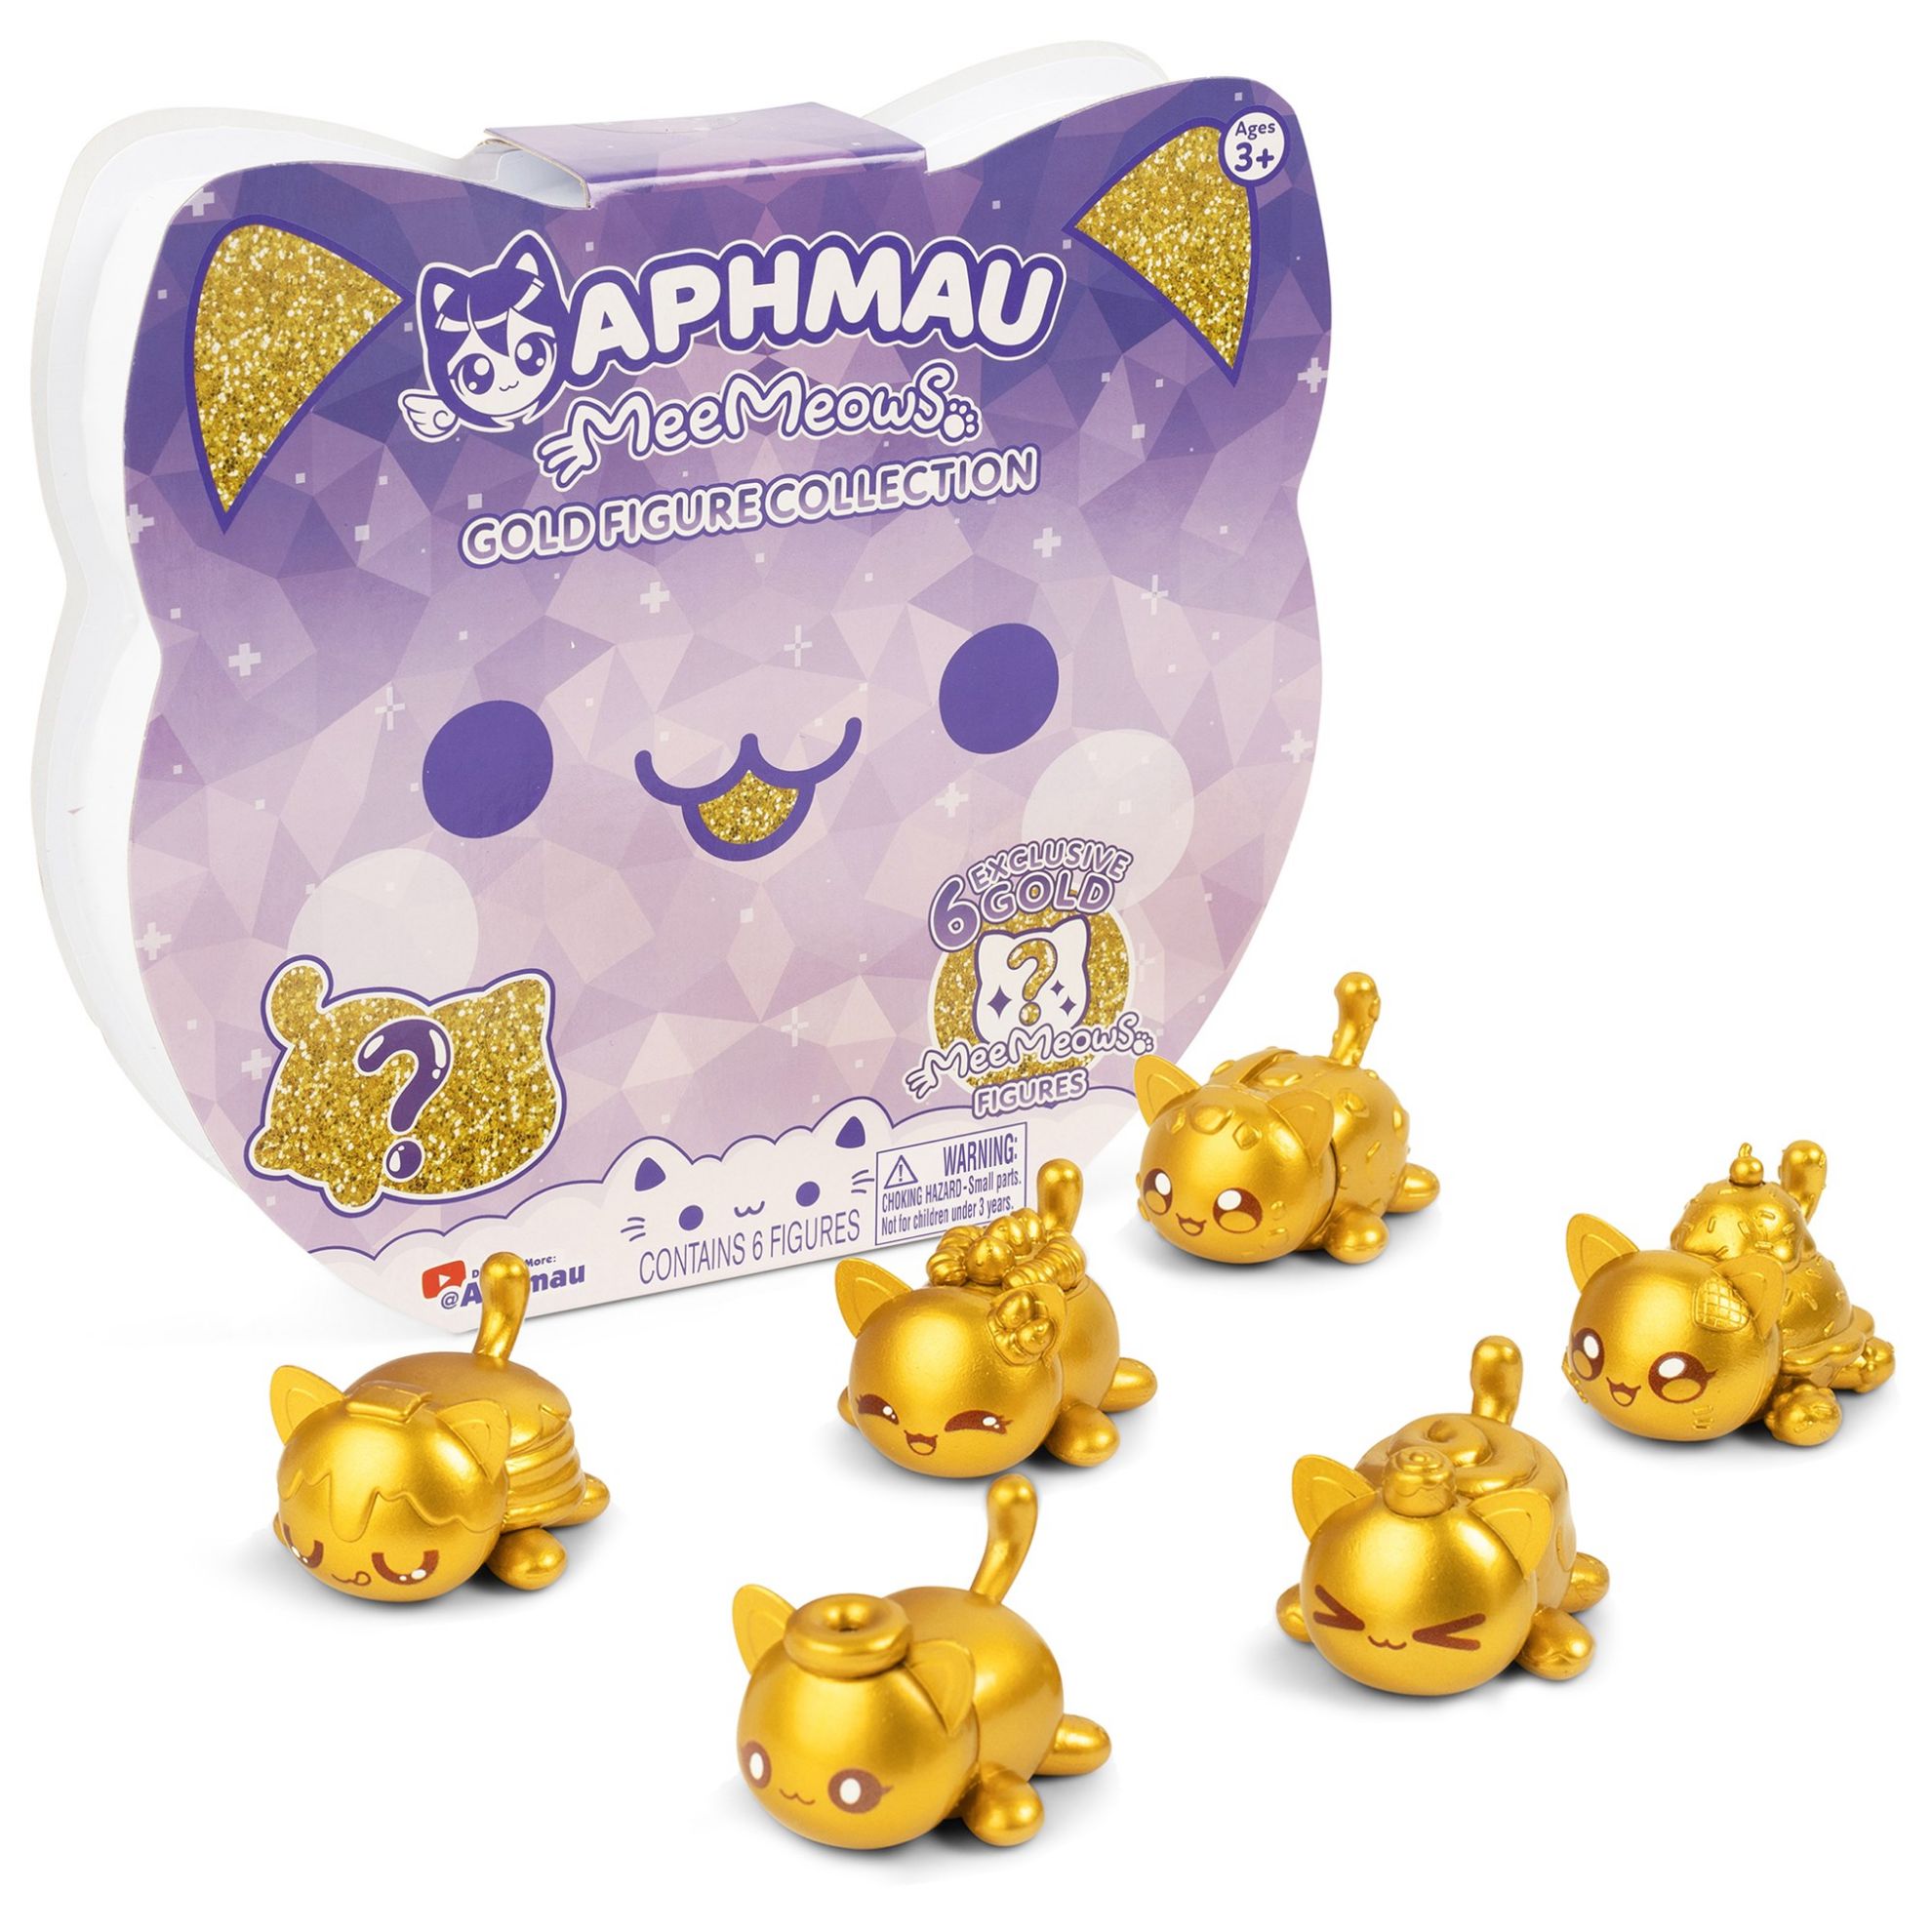 Aphmau Mystery MeeMeows - Gold Figure Collection